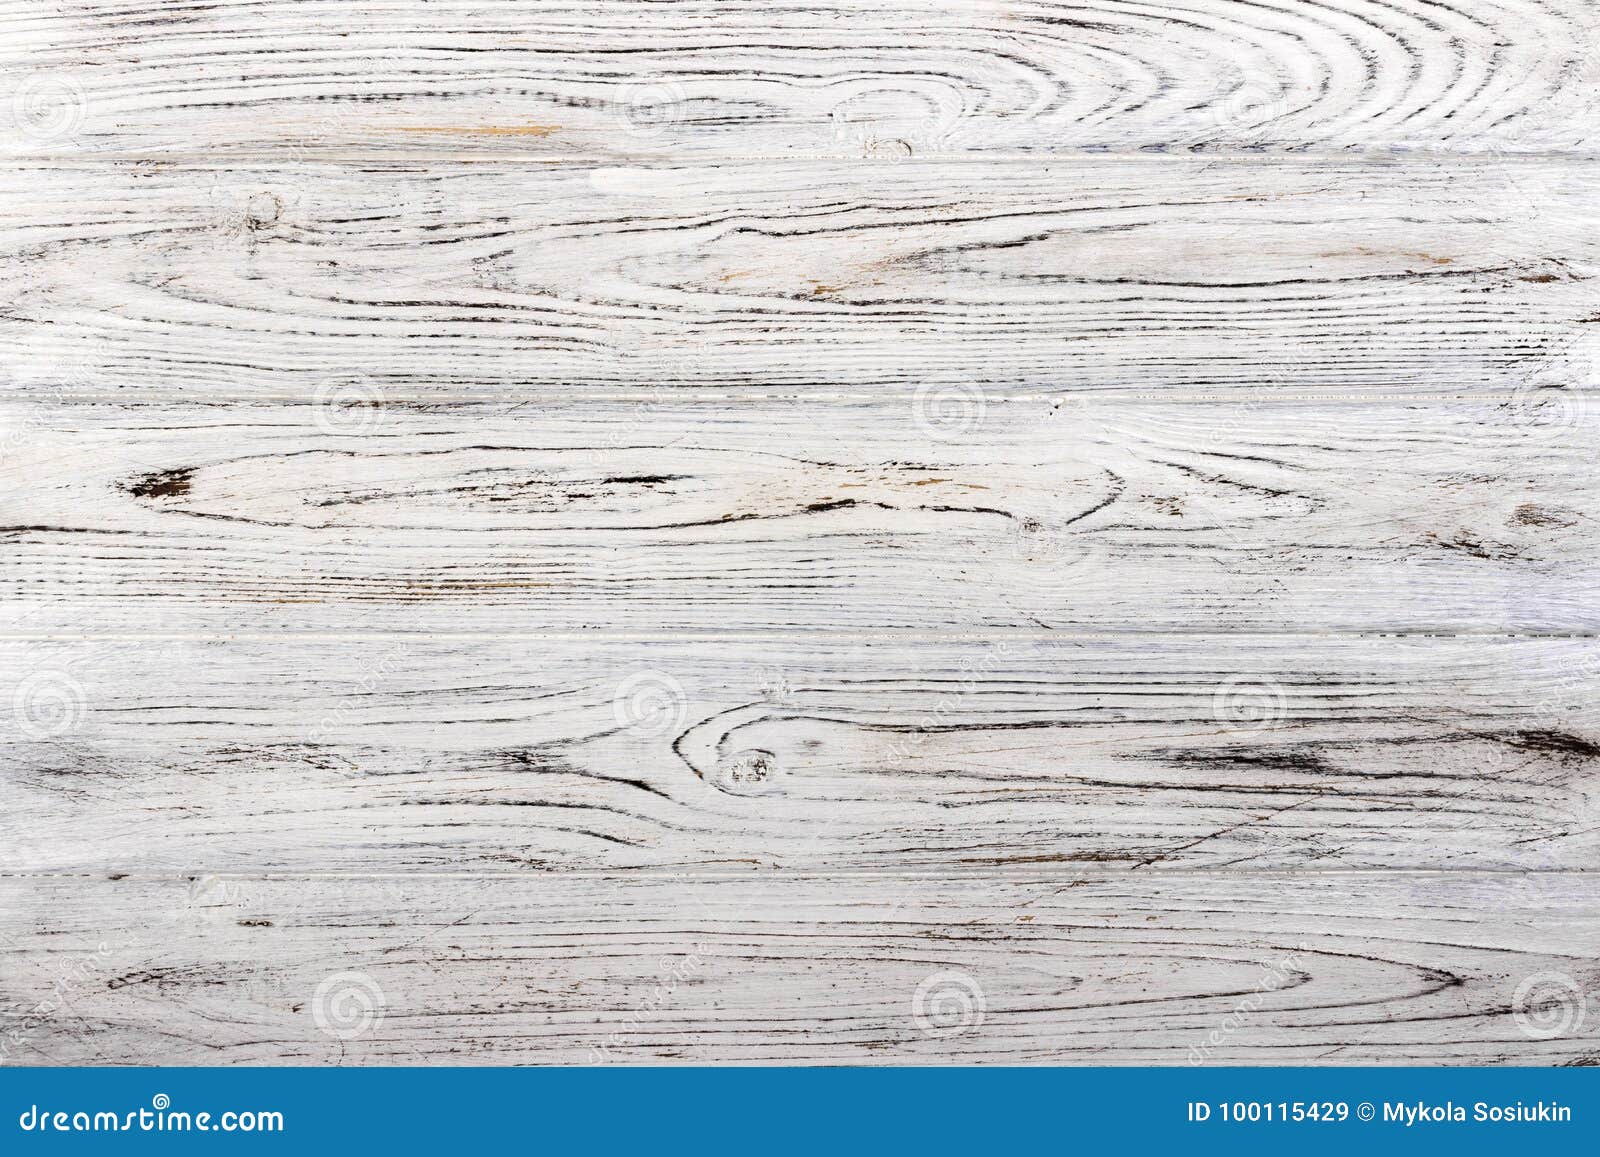 vintage weathered shabby white painted wood texture as background